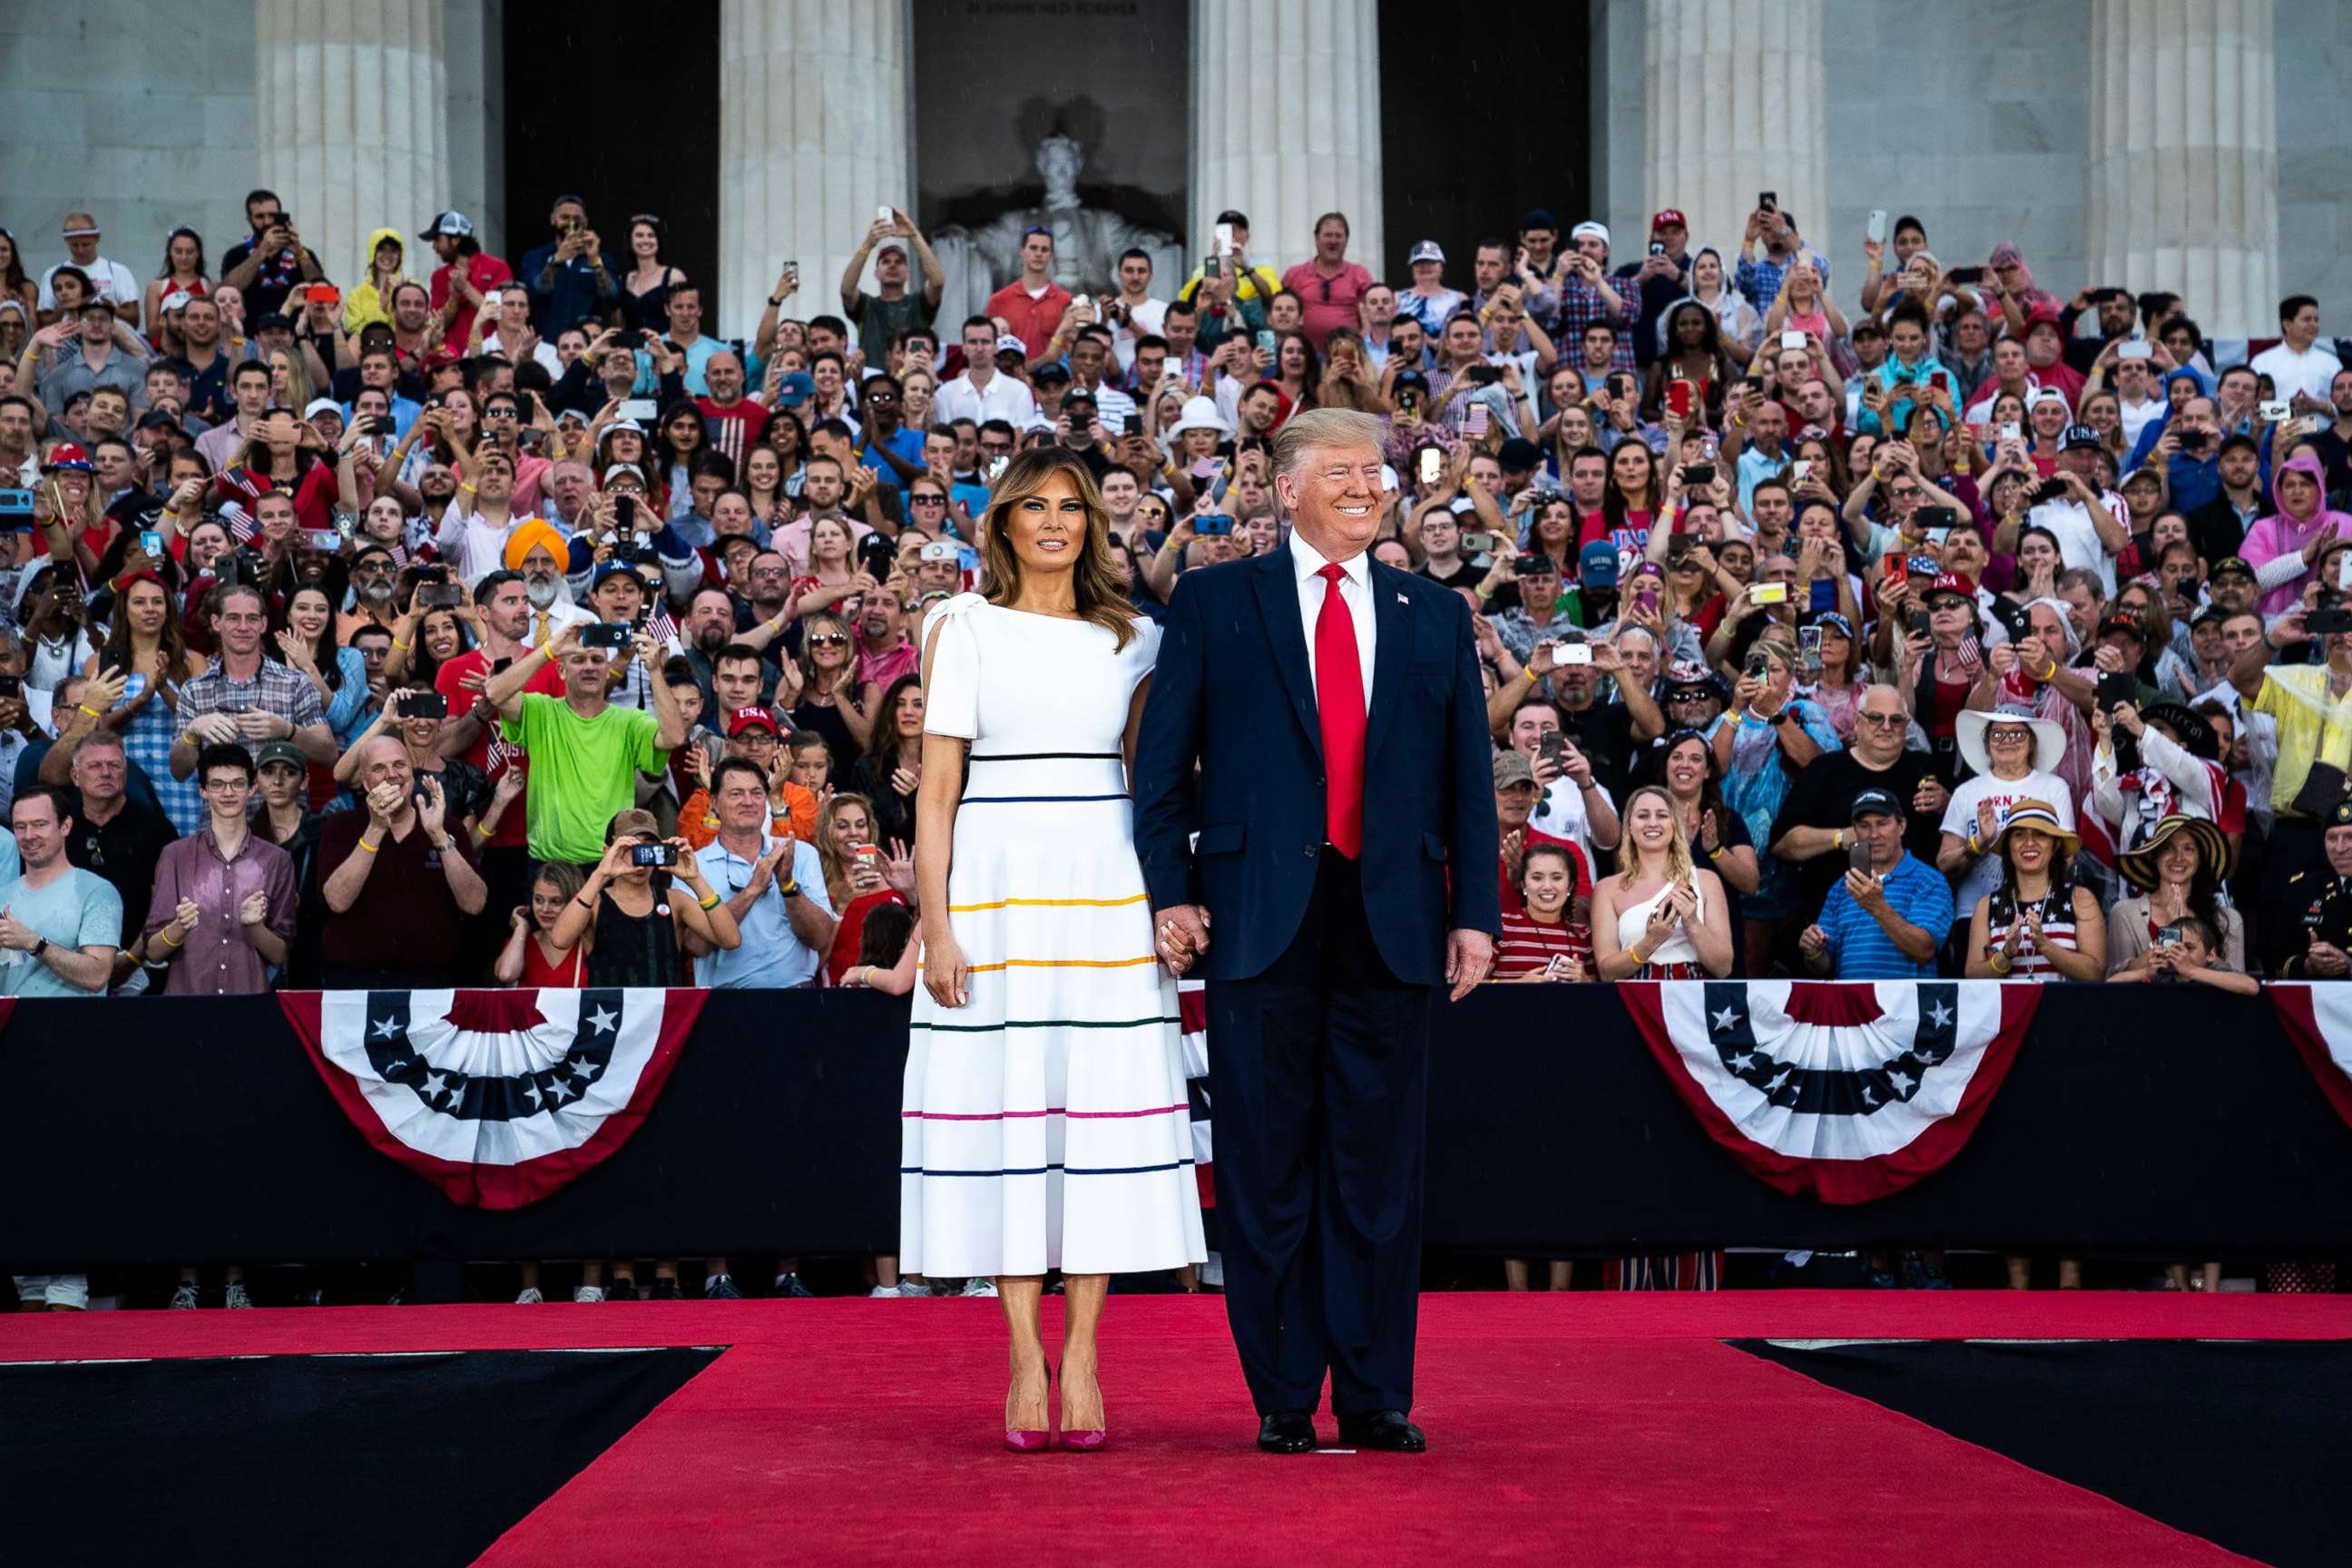 PHOTO: In this July 4, 2019, file photo, President Donald Trump and First Lady Melania Trump are shown at the Independence Day Fourth of July Celebration 'Salute to America' event in Washington, DC.